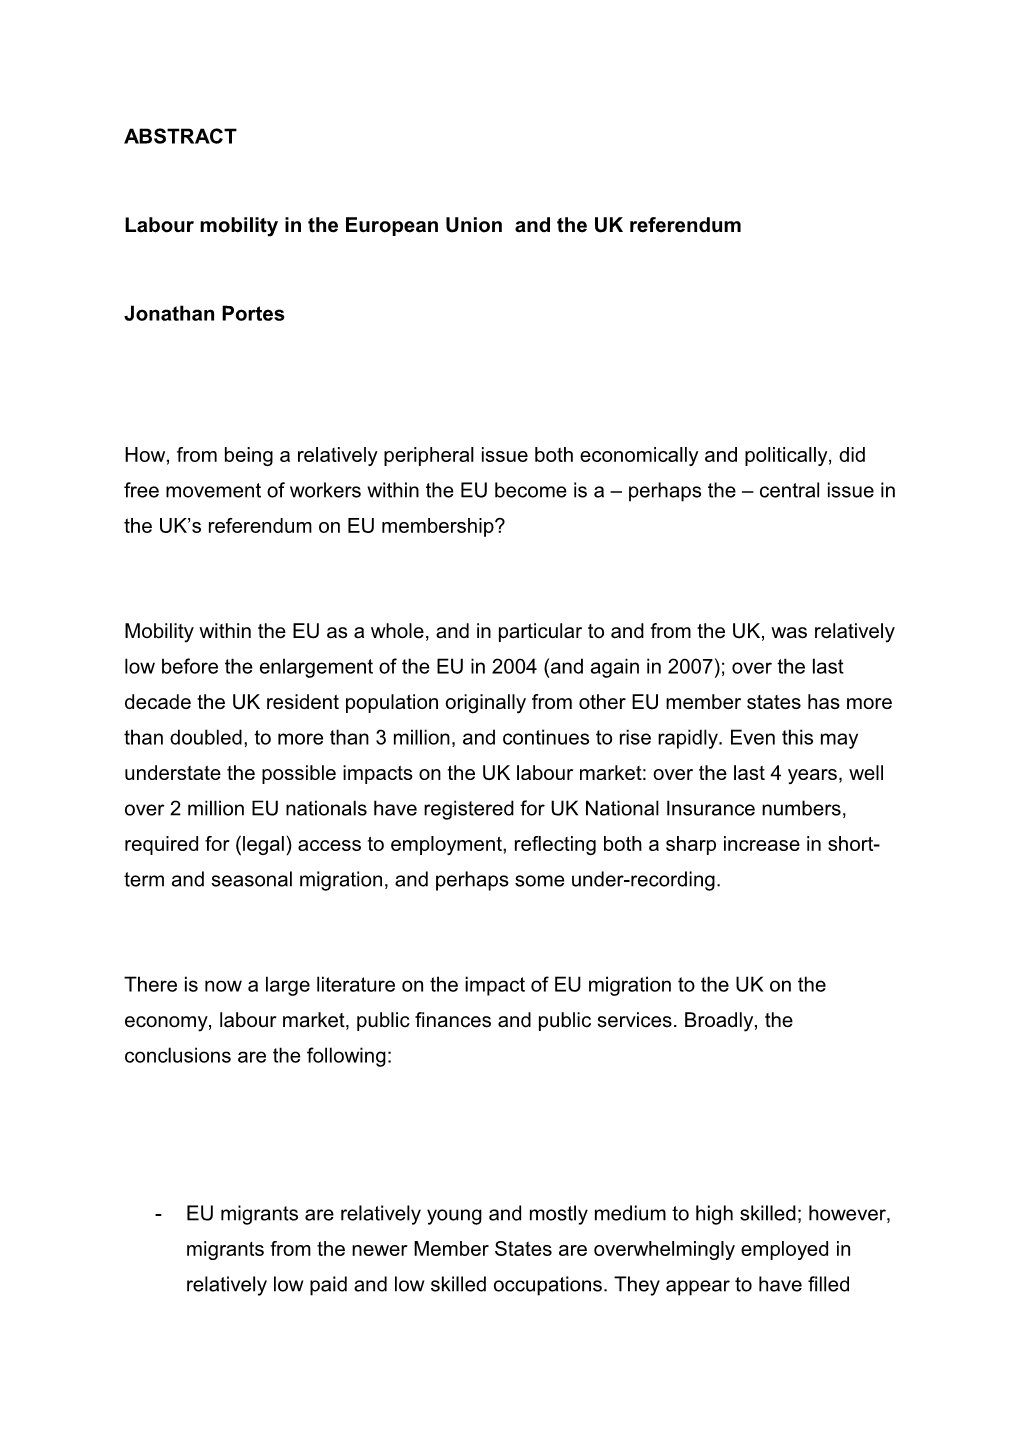 Labour Mobility in the European Union and the UK Referendum